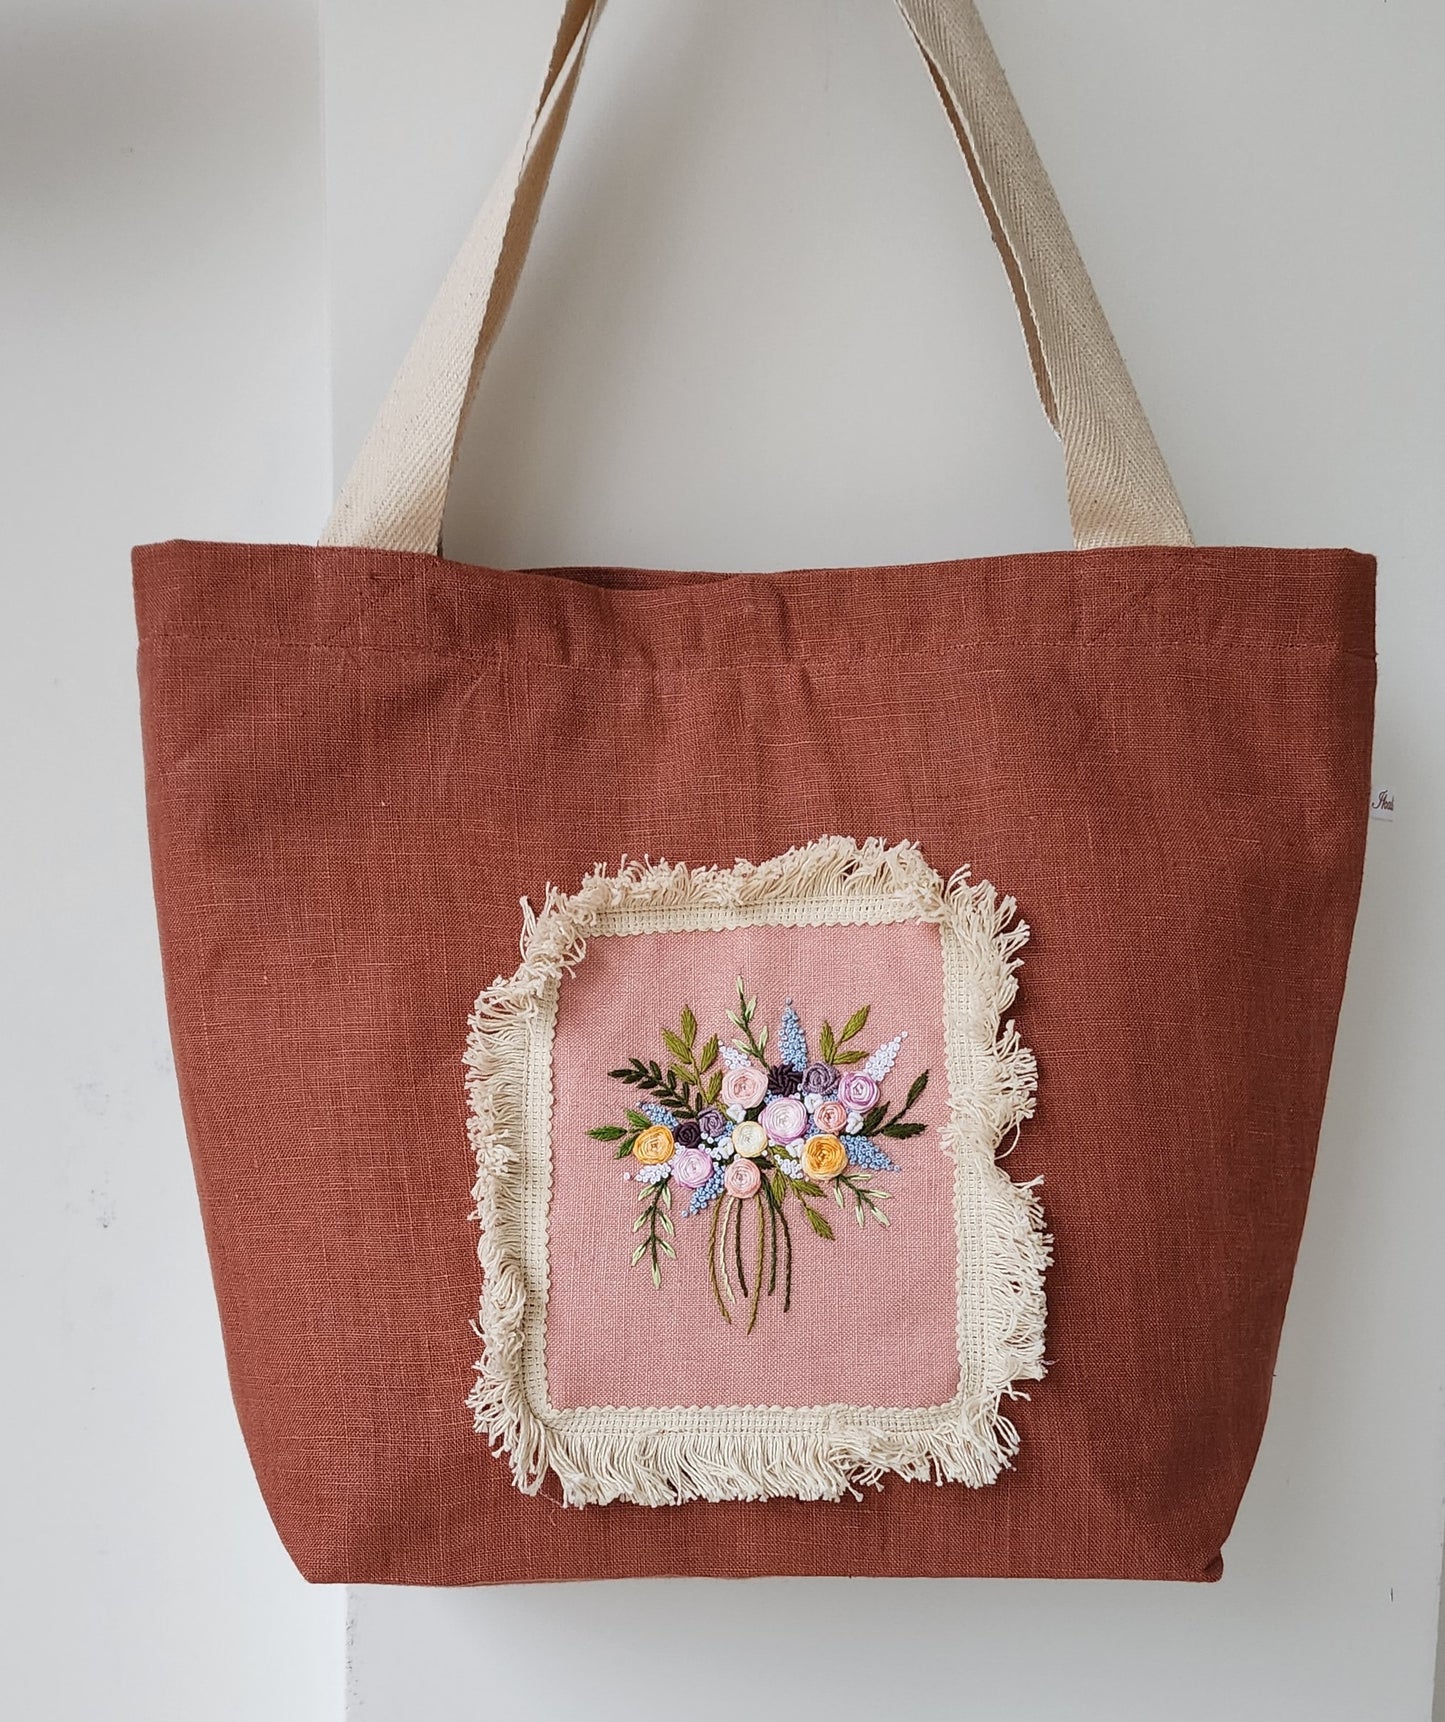 Ikali - Bouquet - Hand-embroidered Tote